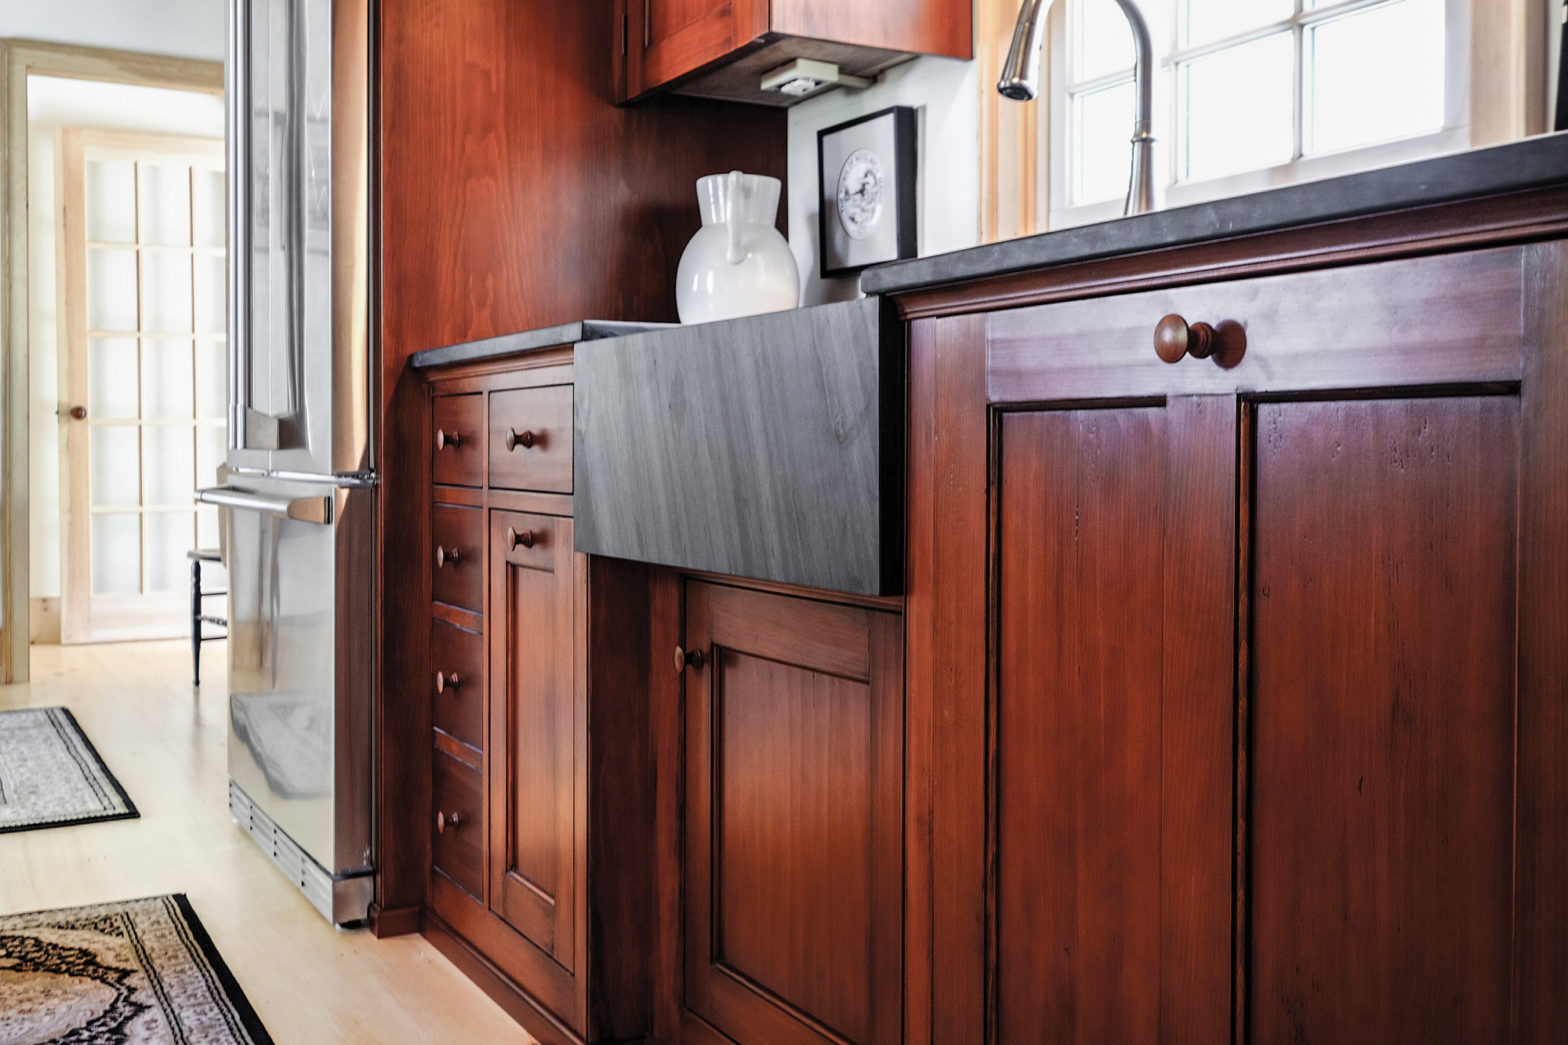 Home Design: Fixed Or Removable Kitchen Cabinets